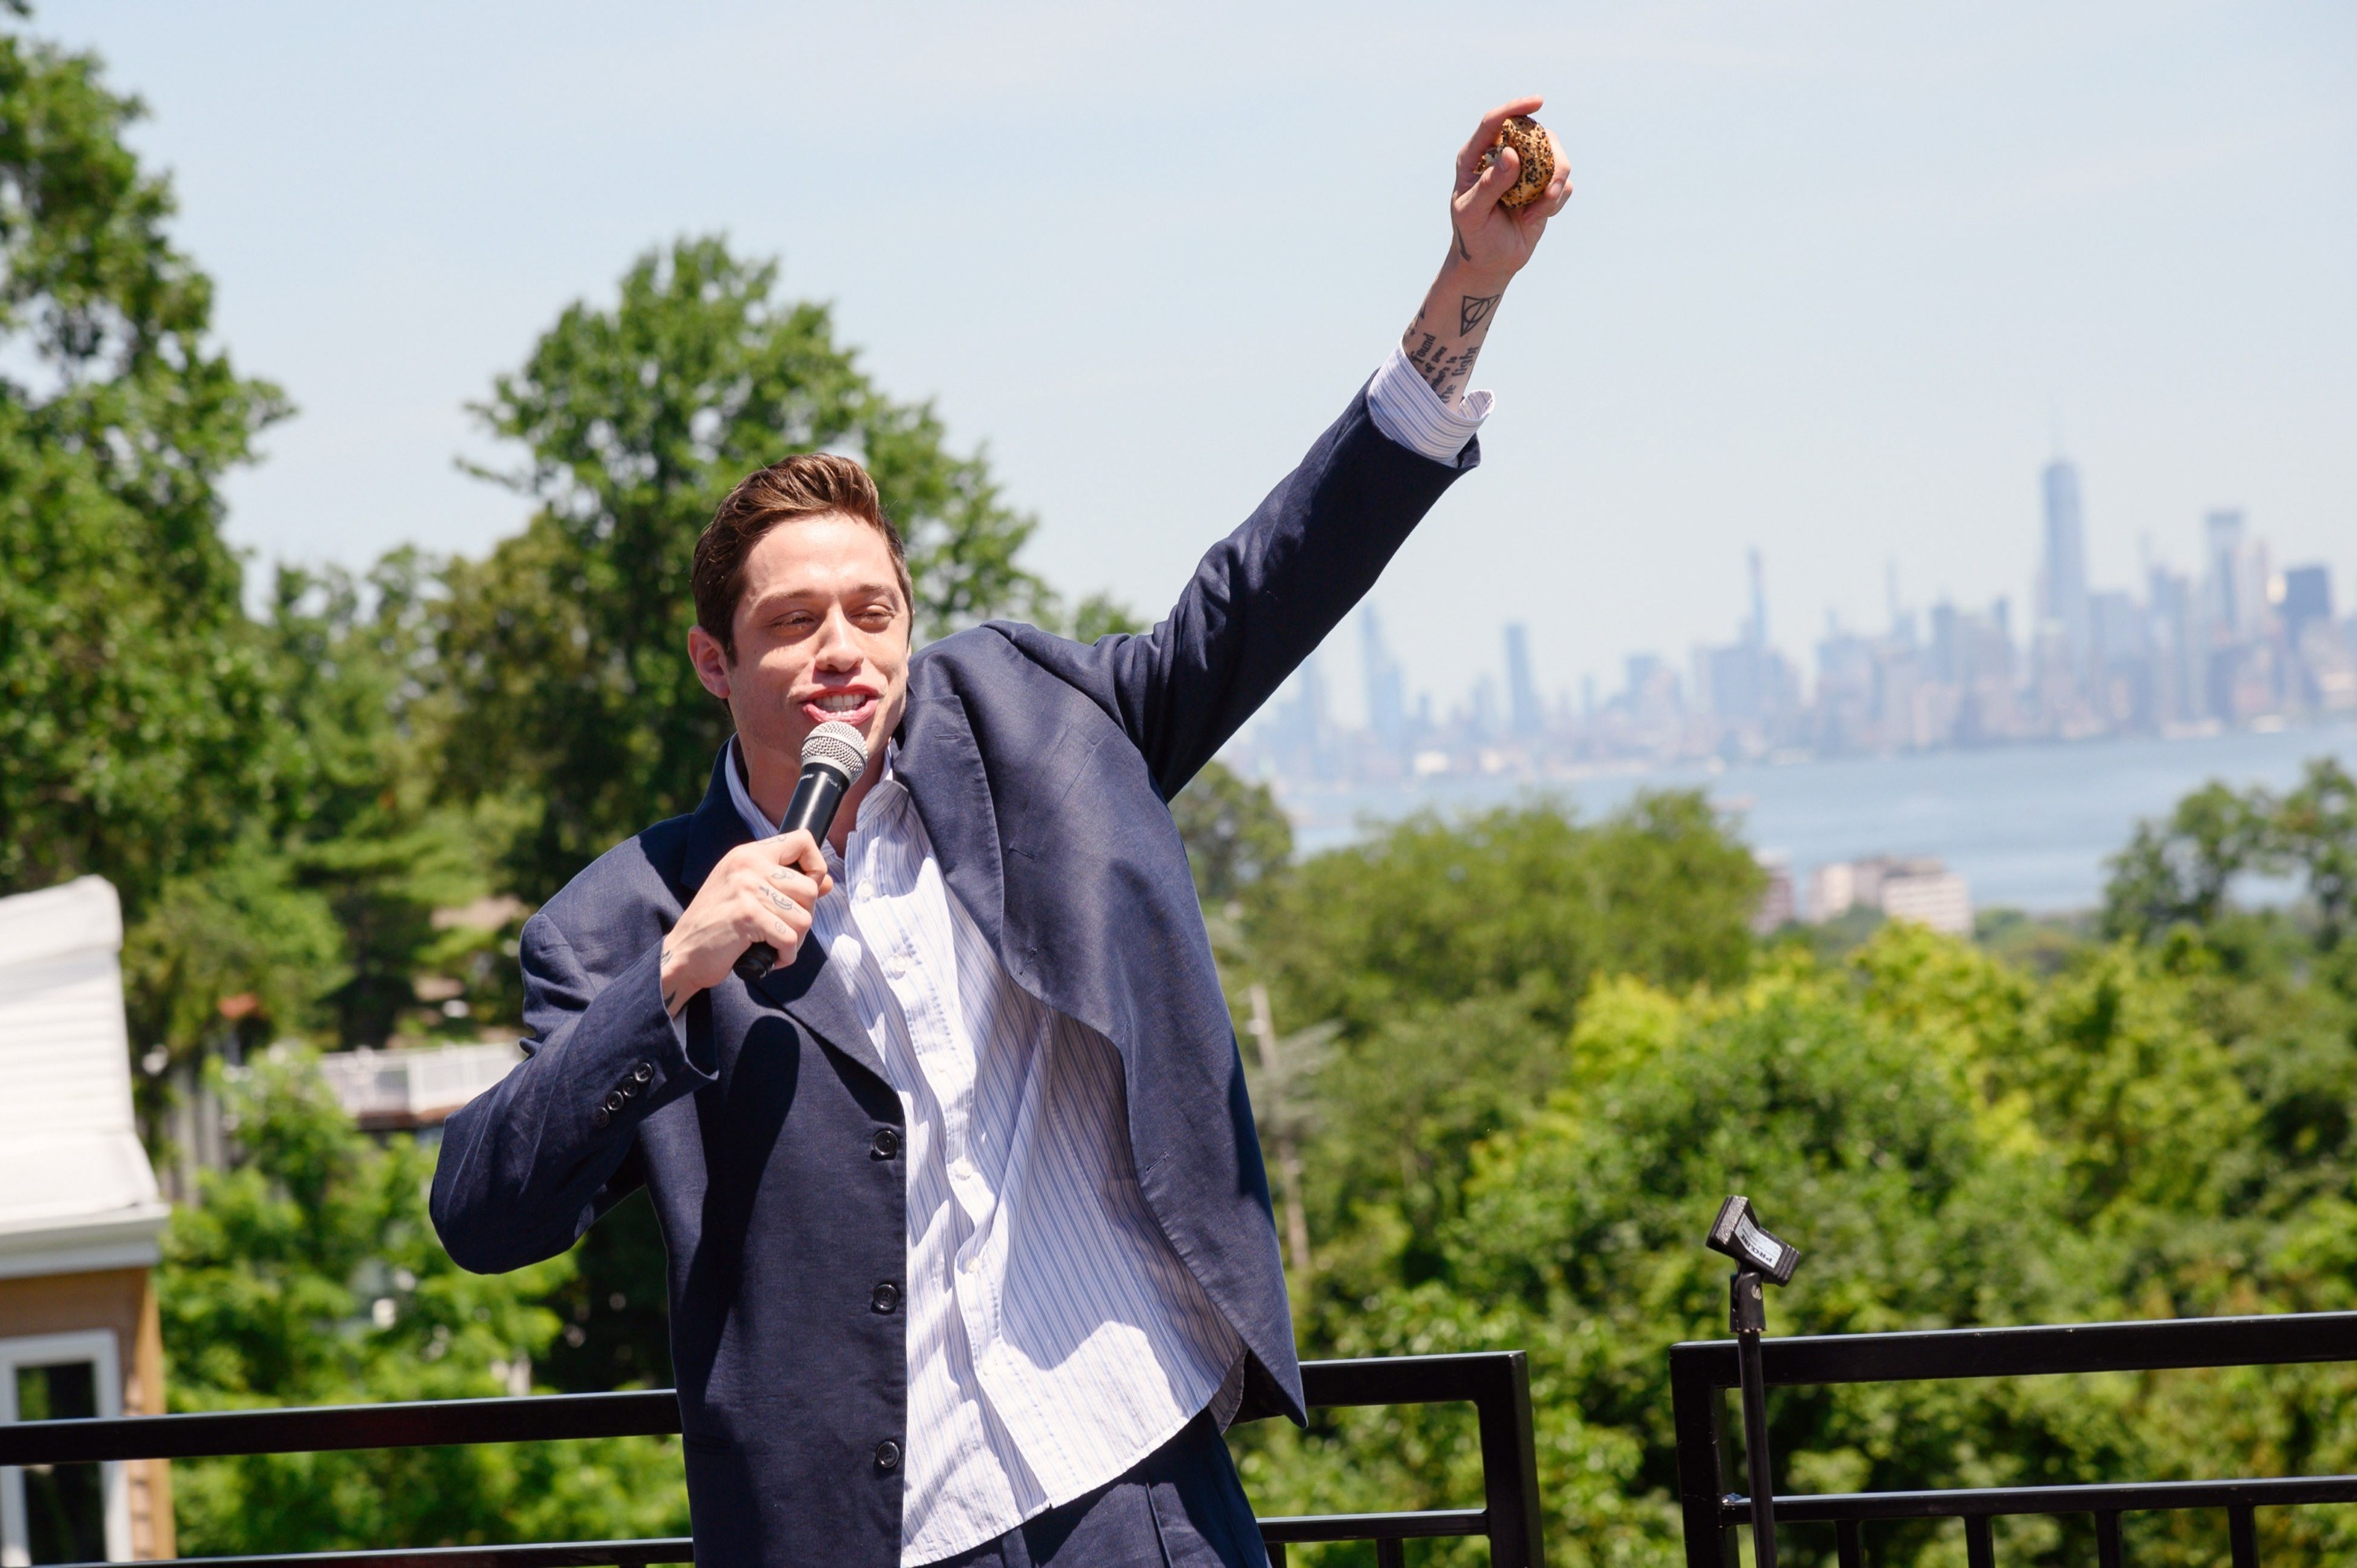 Pete standing outside speaking into a microphone with the Manhattan skyline in the background